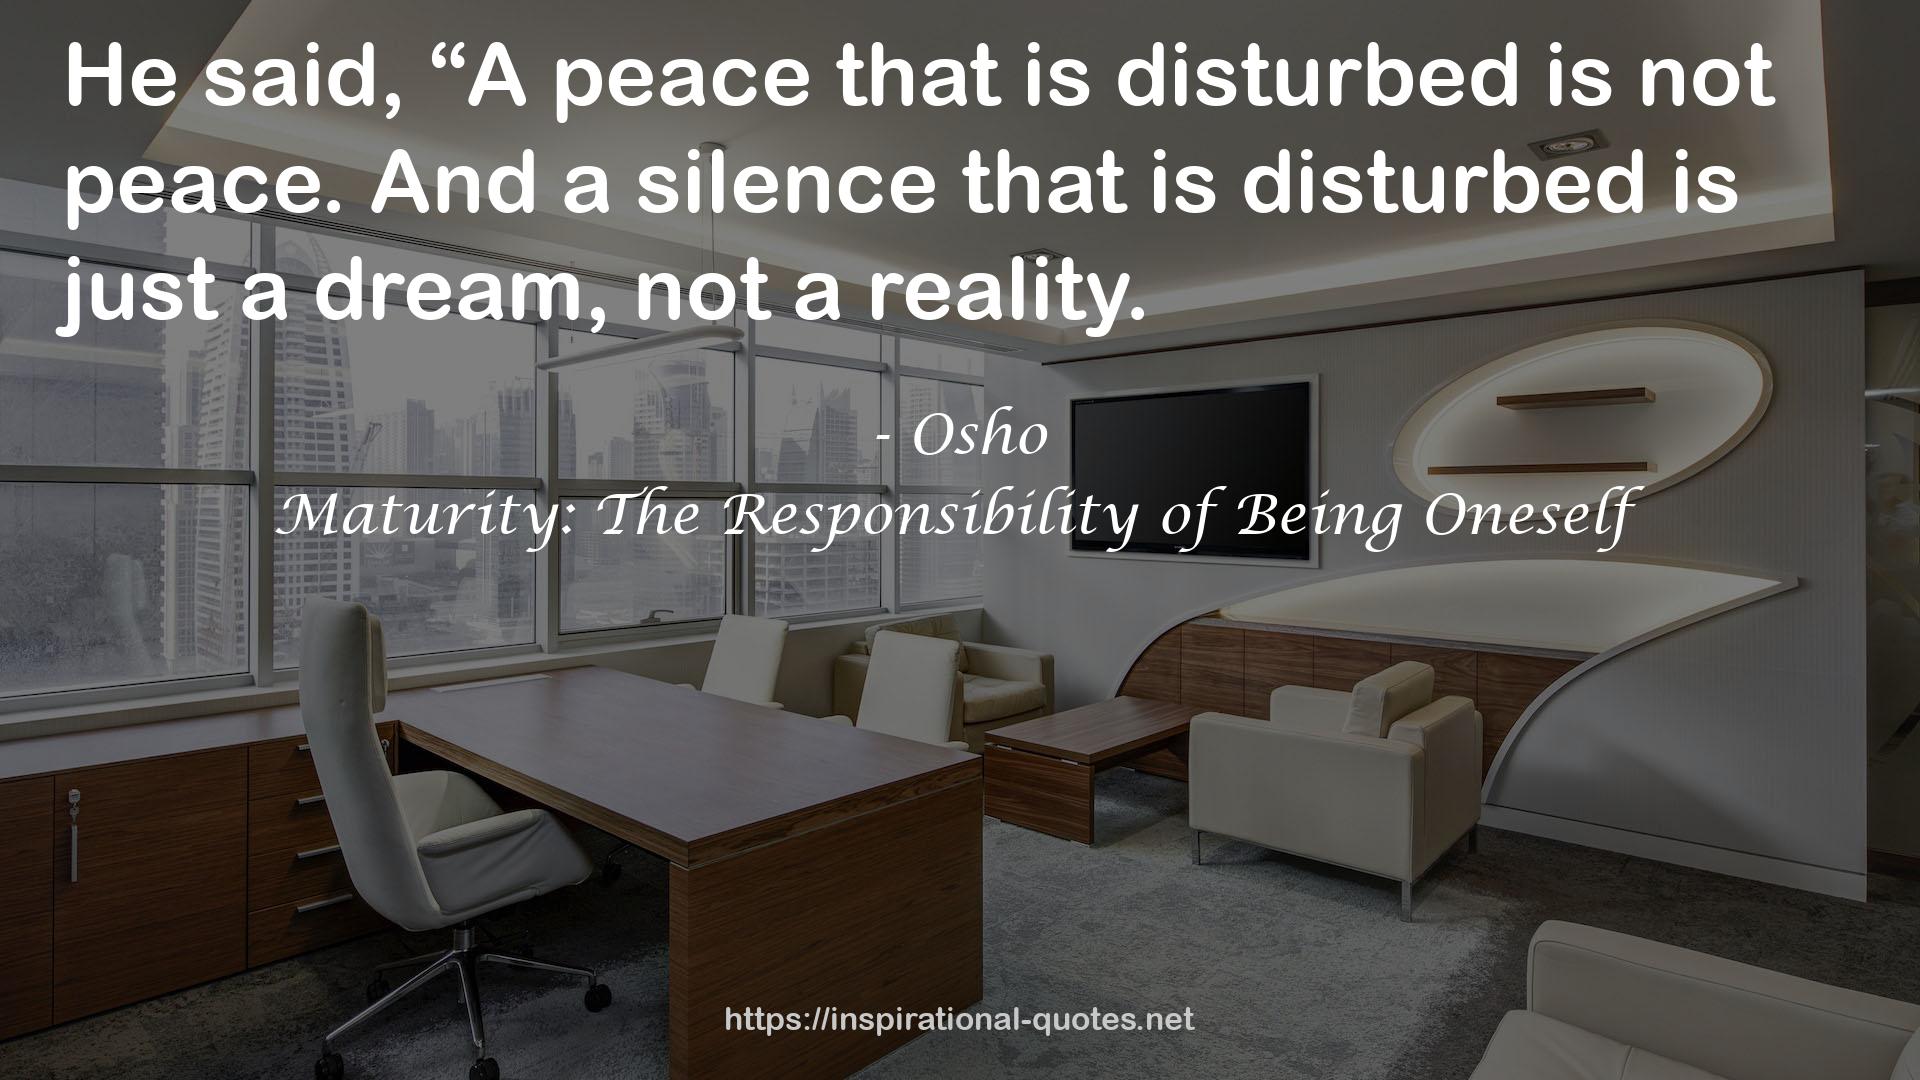 Maturity: The Responsibility of Being Oneself QUOTES